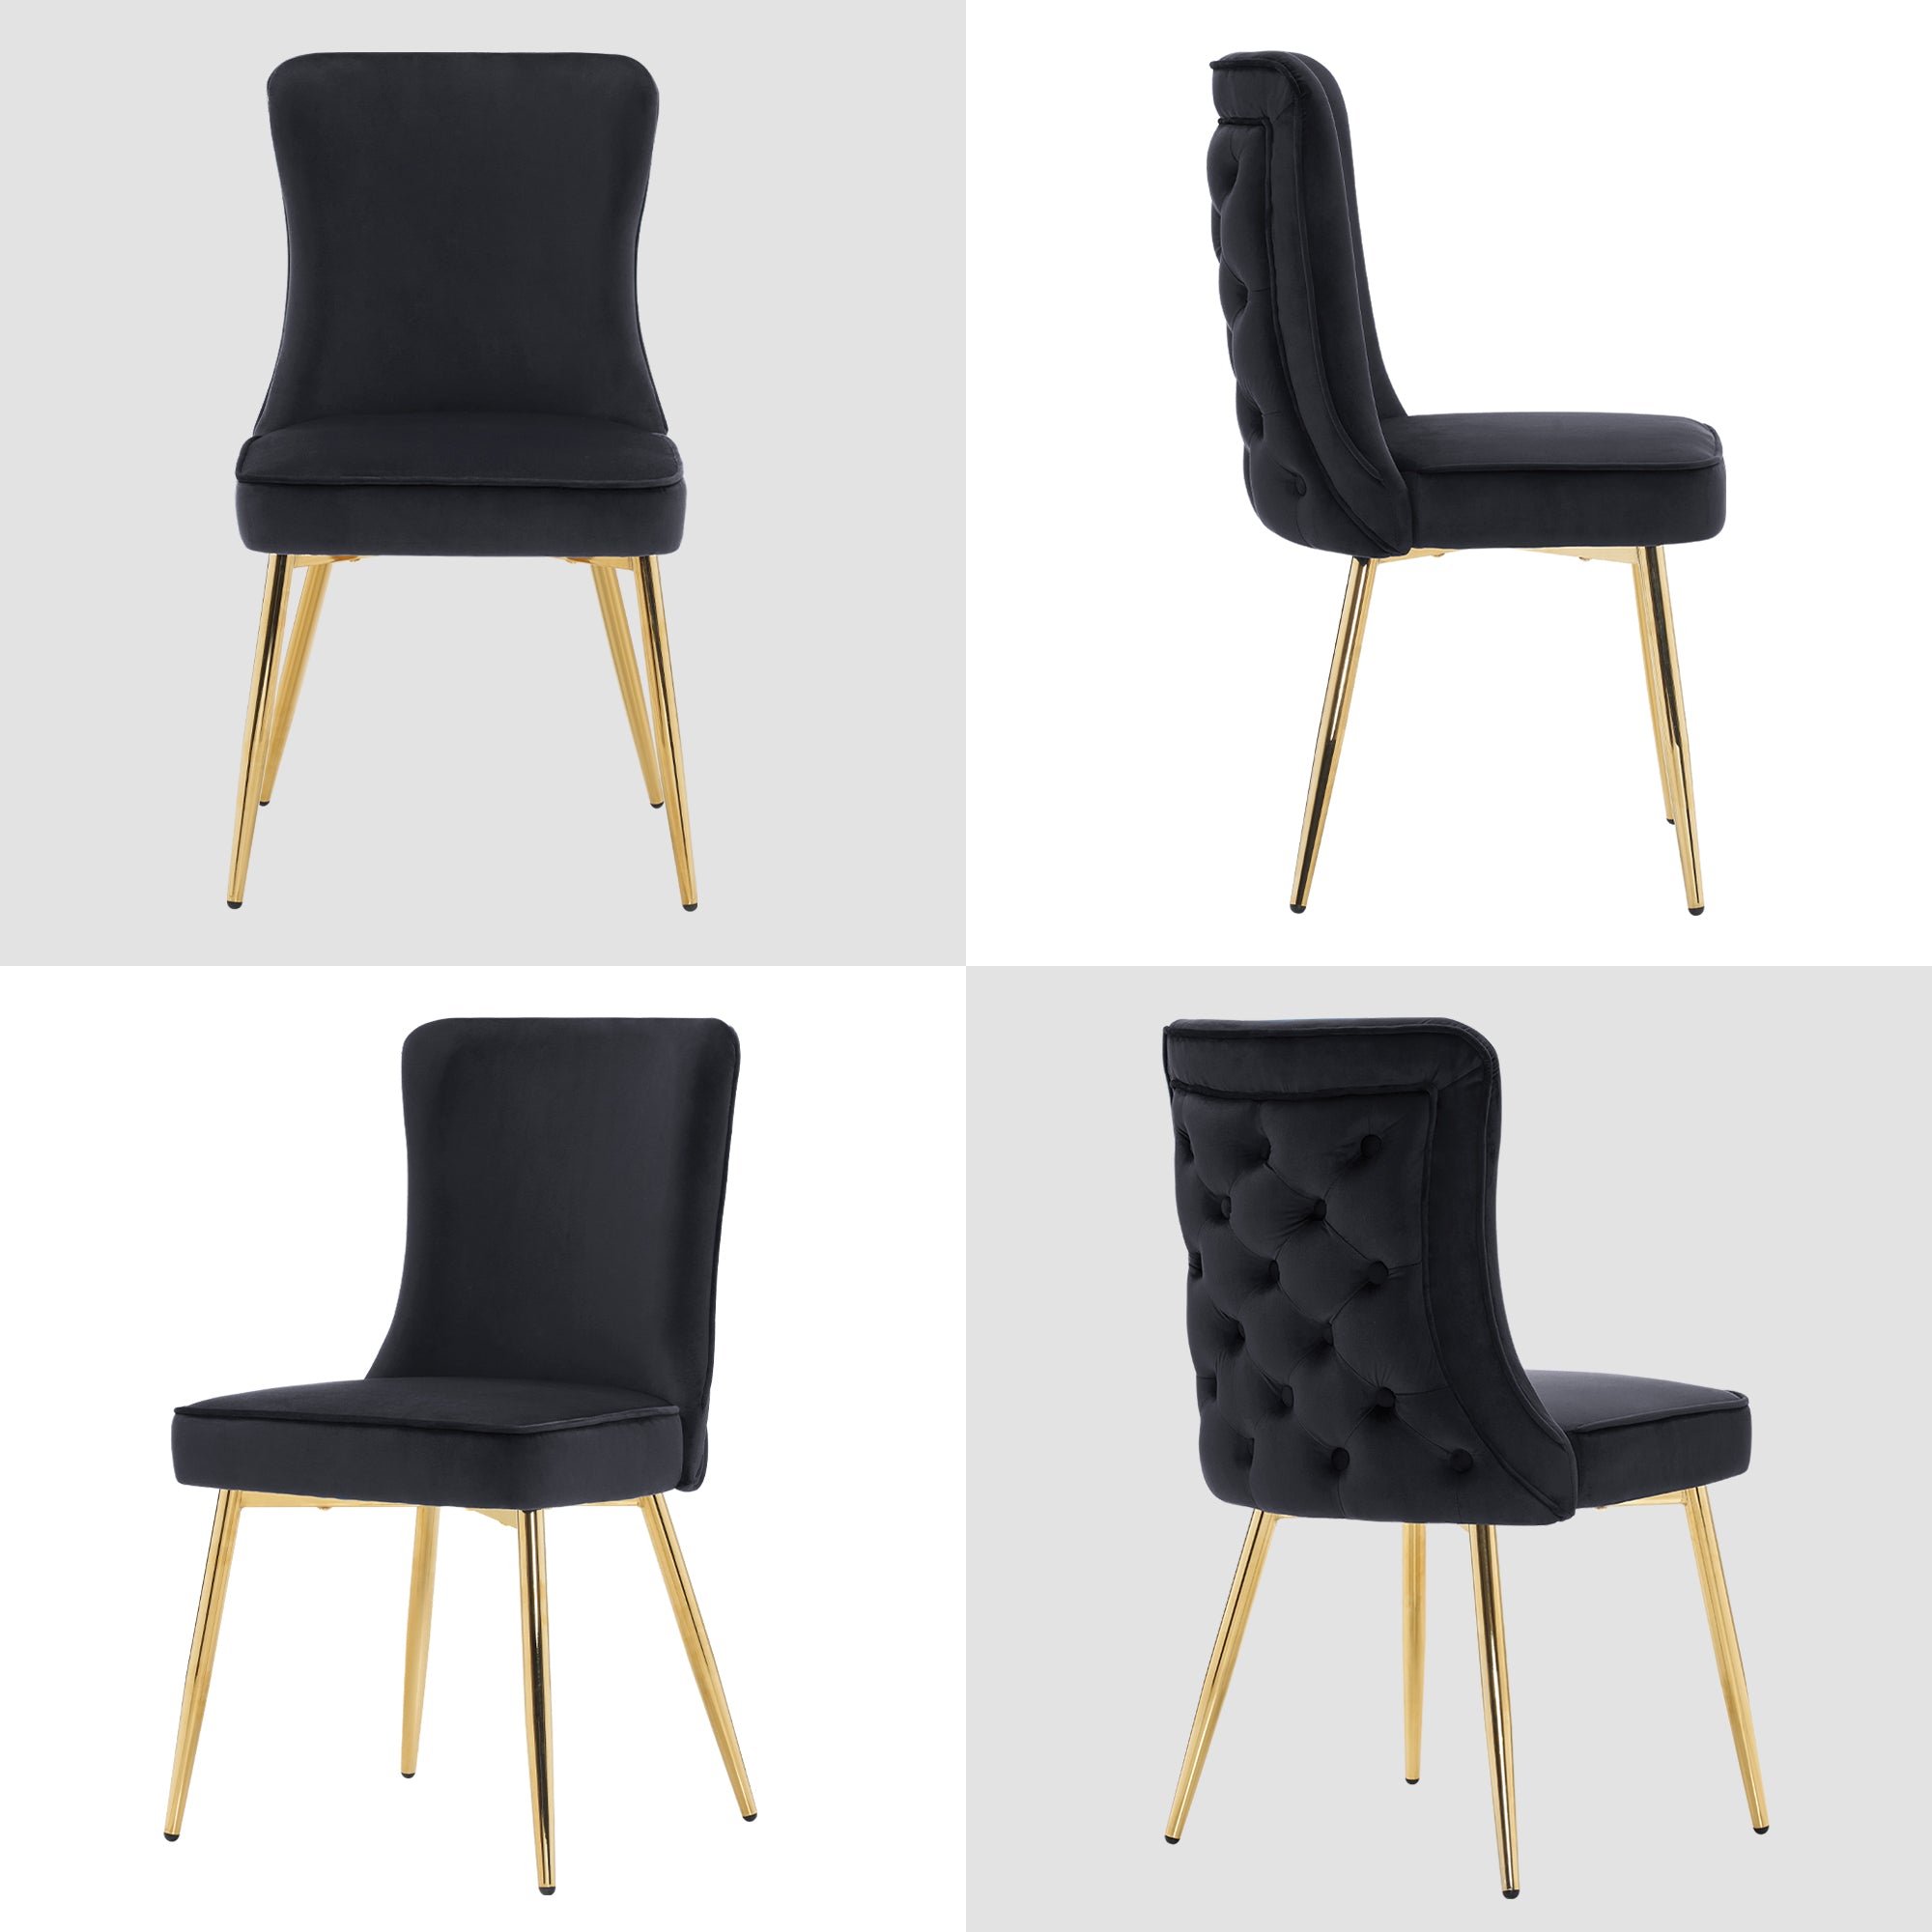 ivinta Tufted Dining Chair Set of 2, Luxury Black Tufted Button Back Dining Room Chair, Upholstery Accent Chair with Gold Legs, Mid-Century Modern Wingback Chair for Dining Room, Living Room